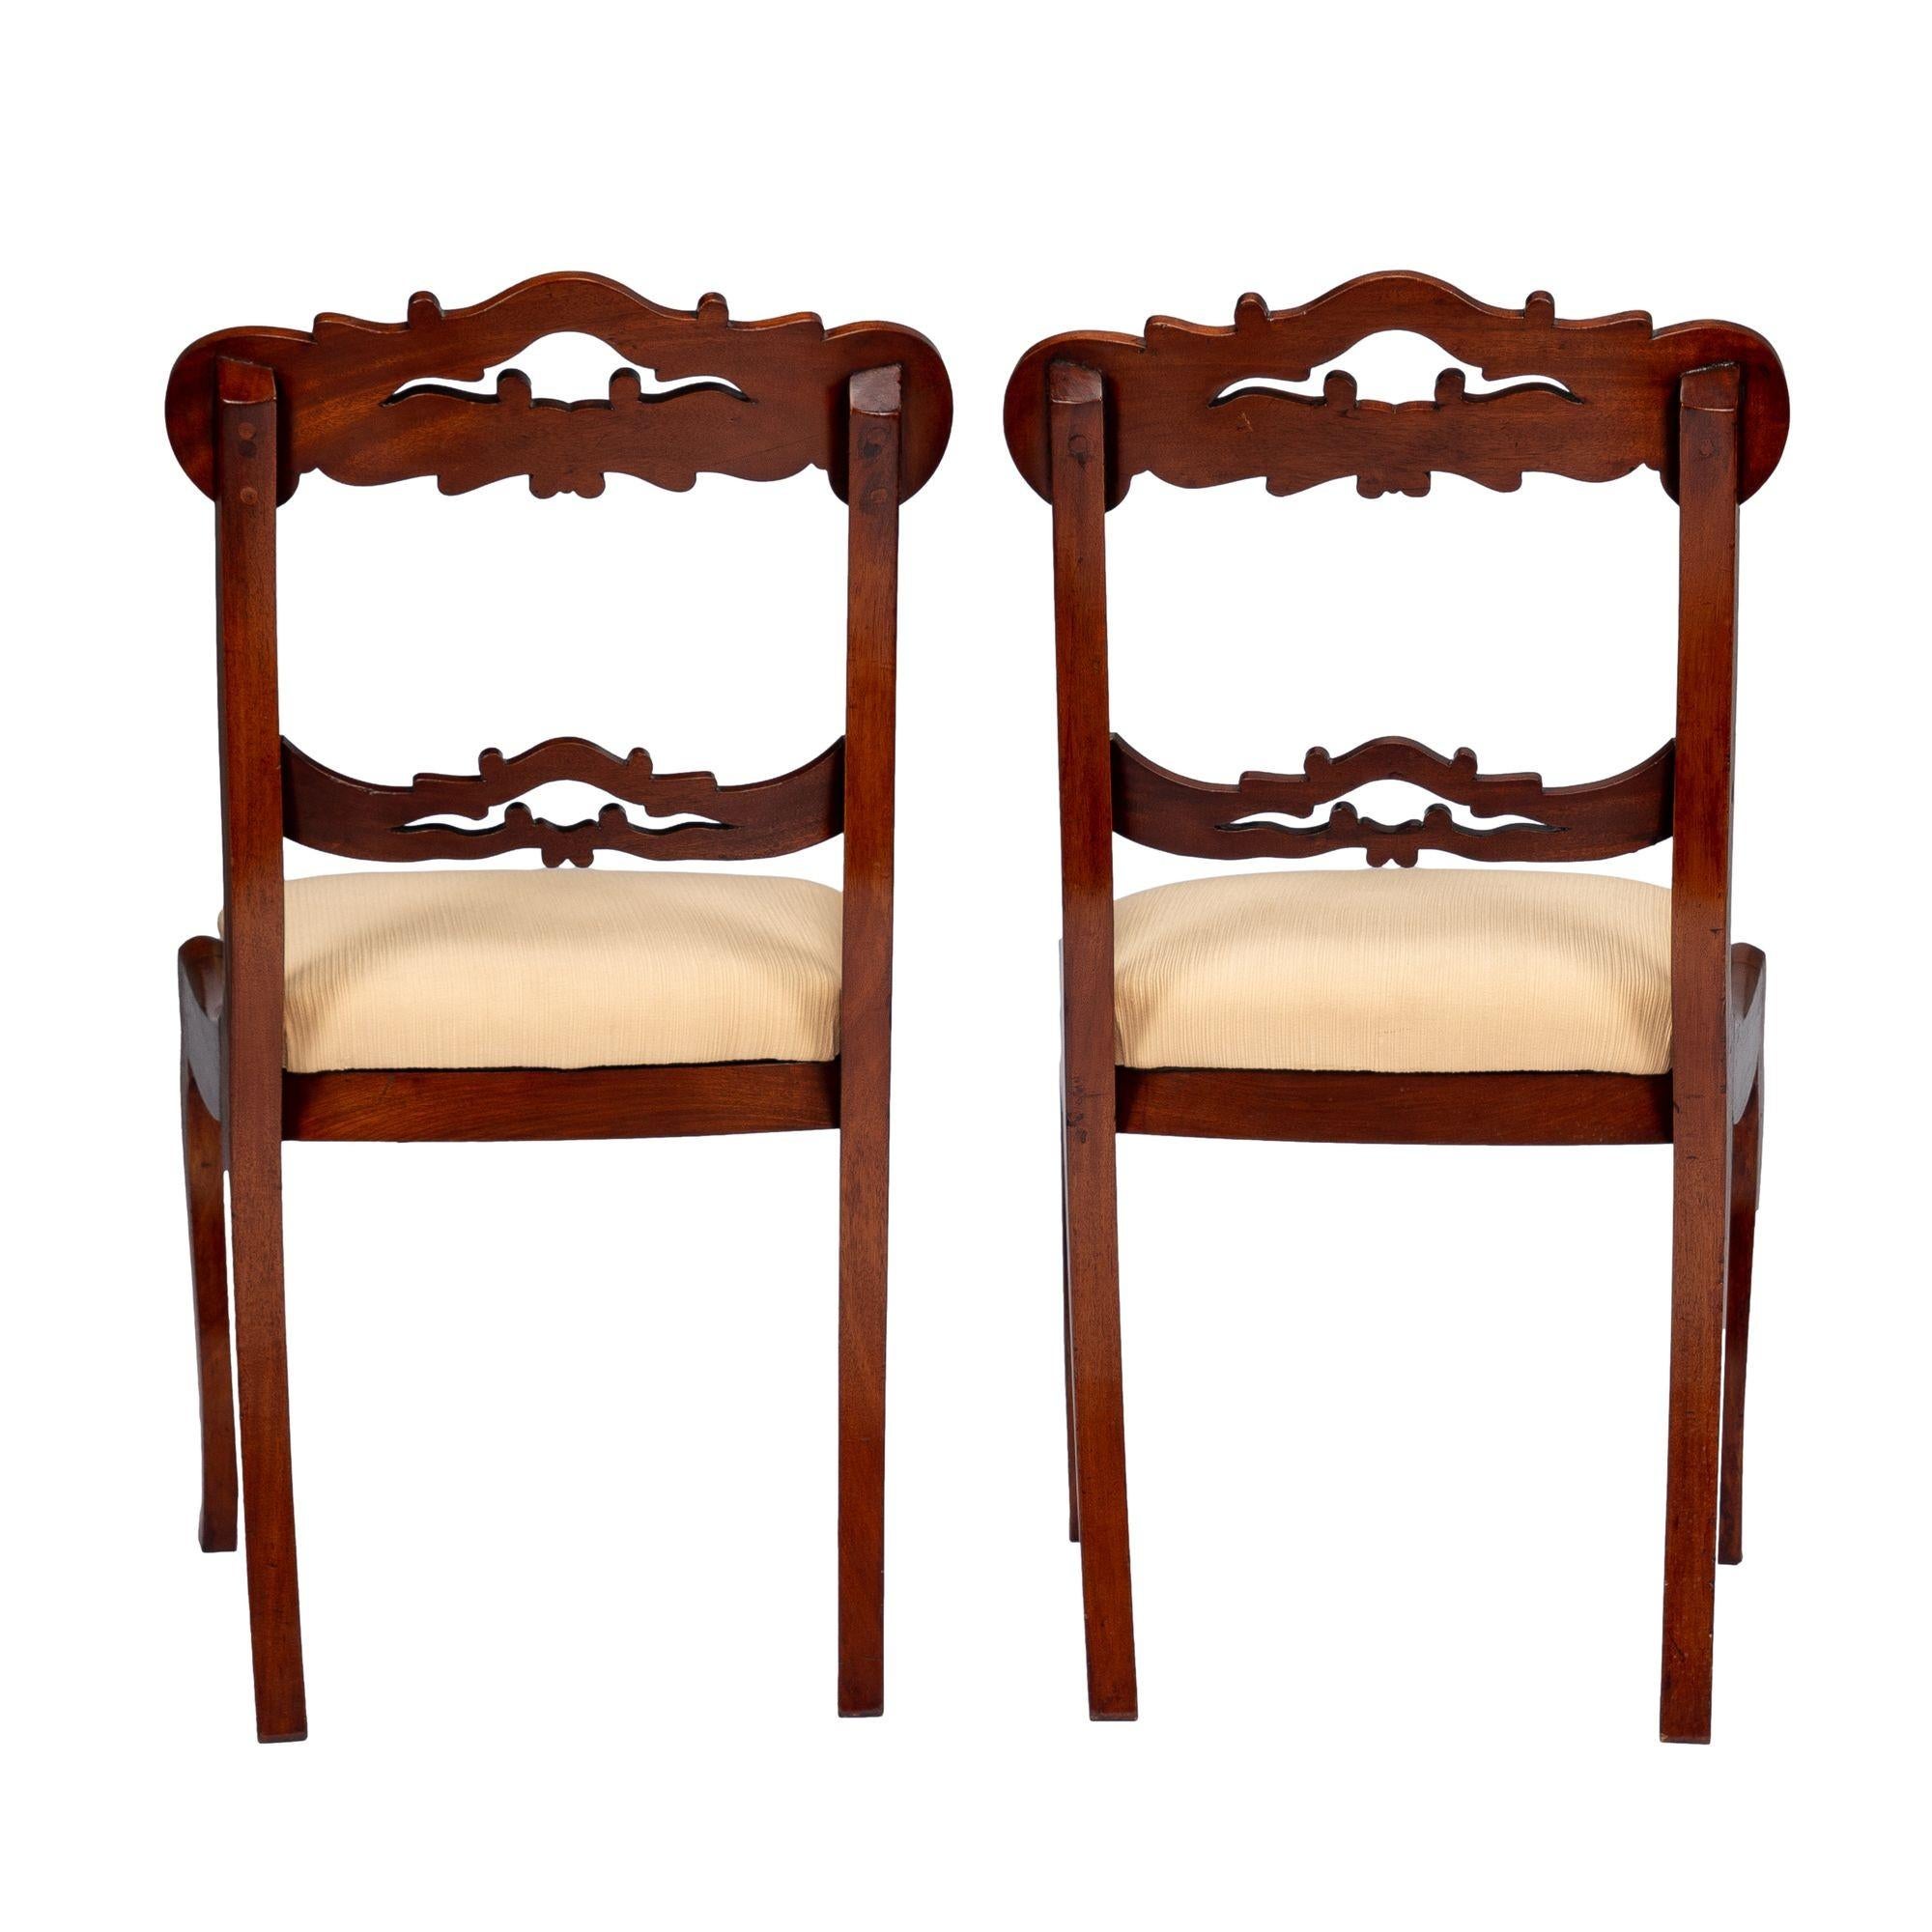 Pair of Boston late Classical slip seat mahogany side chairs, 1830-45 For Sale 2